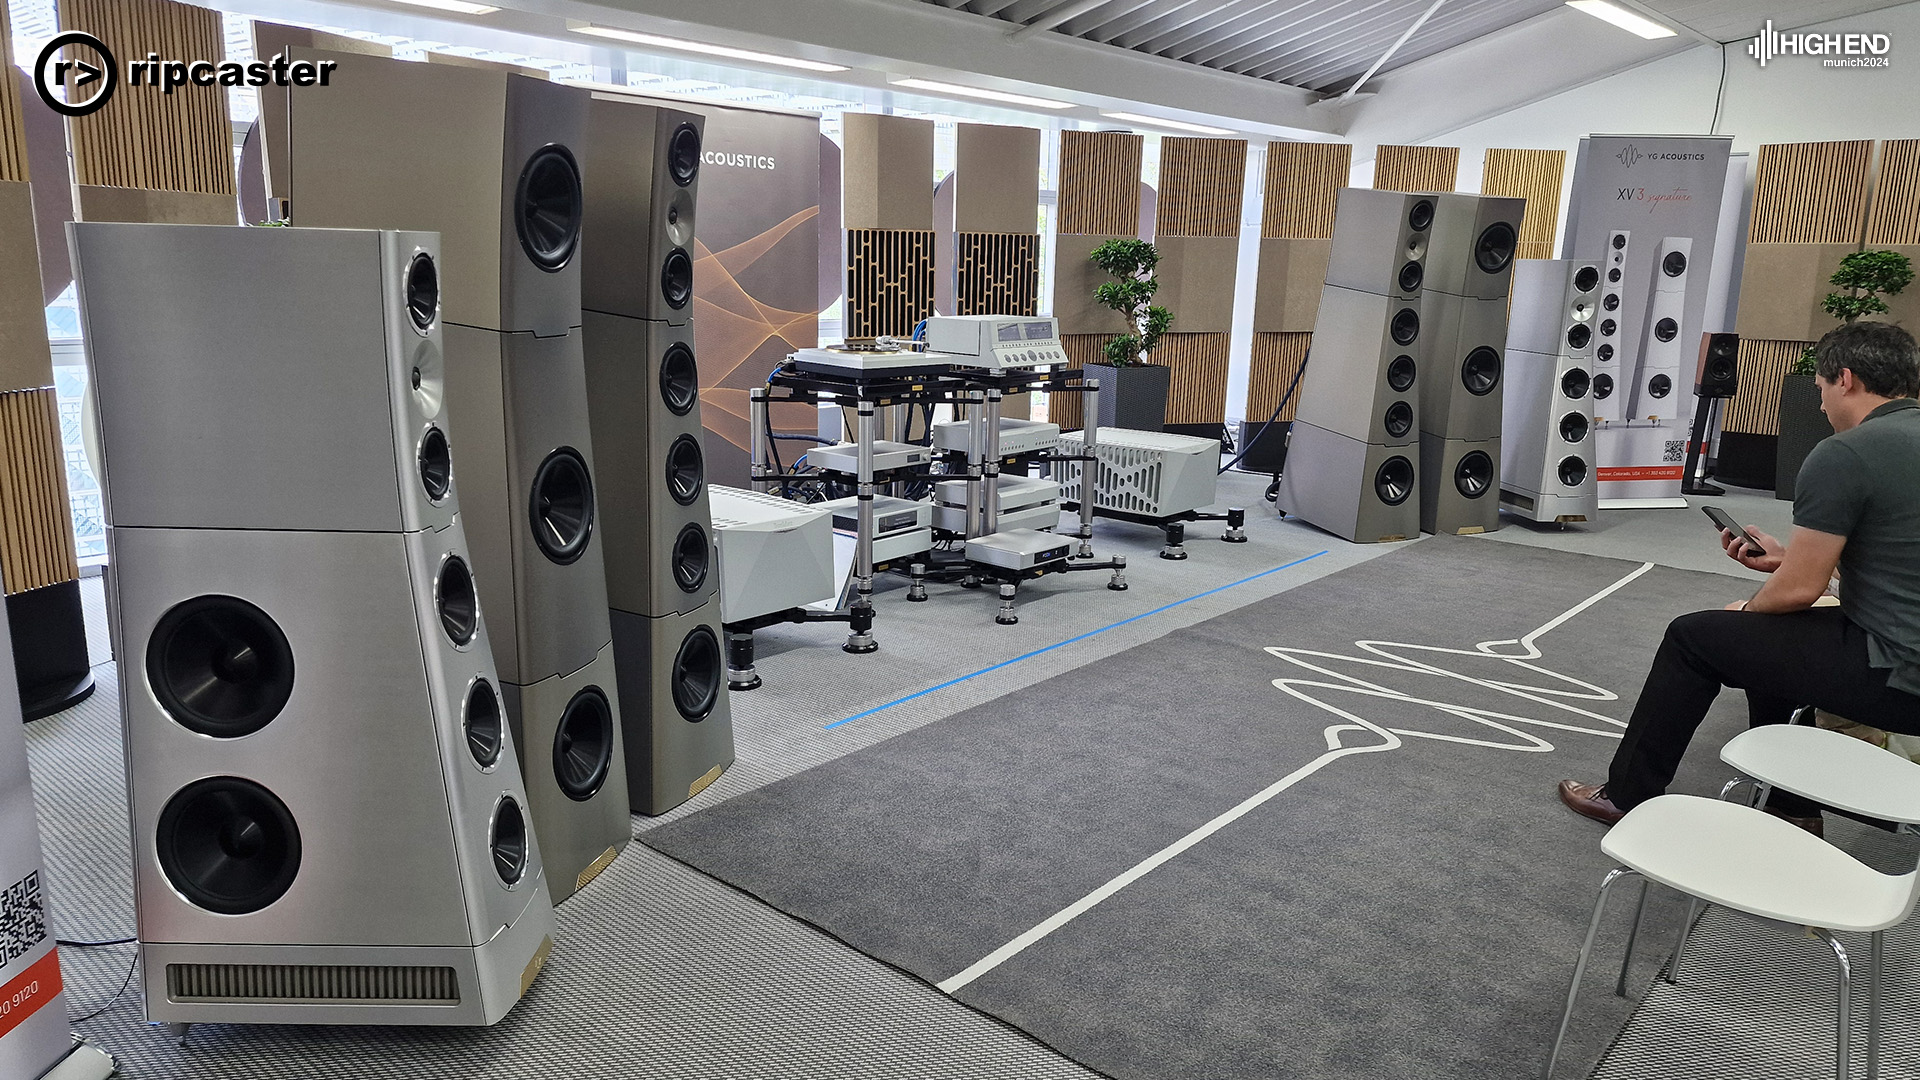 A lot of floorstanding speakers in silver with lots of other HiFi equipment and a man sitting on a seat to the right.